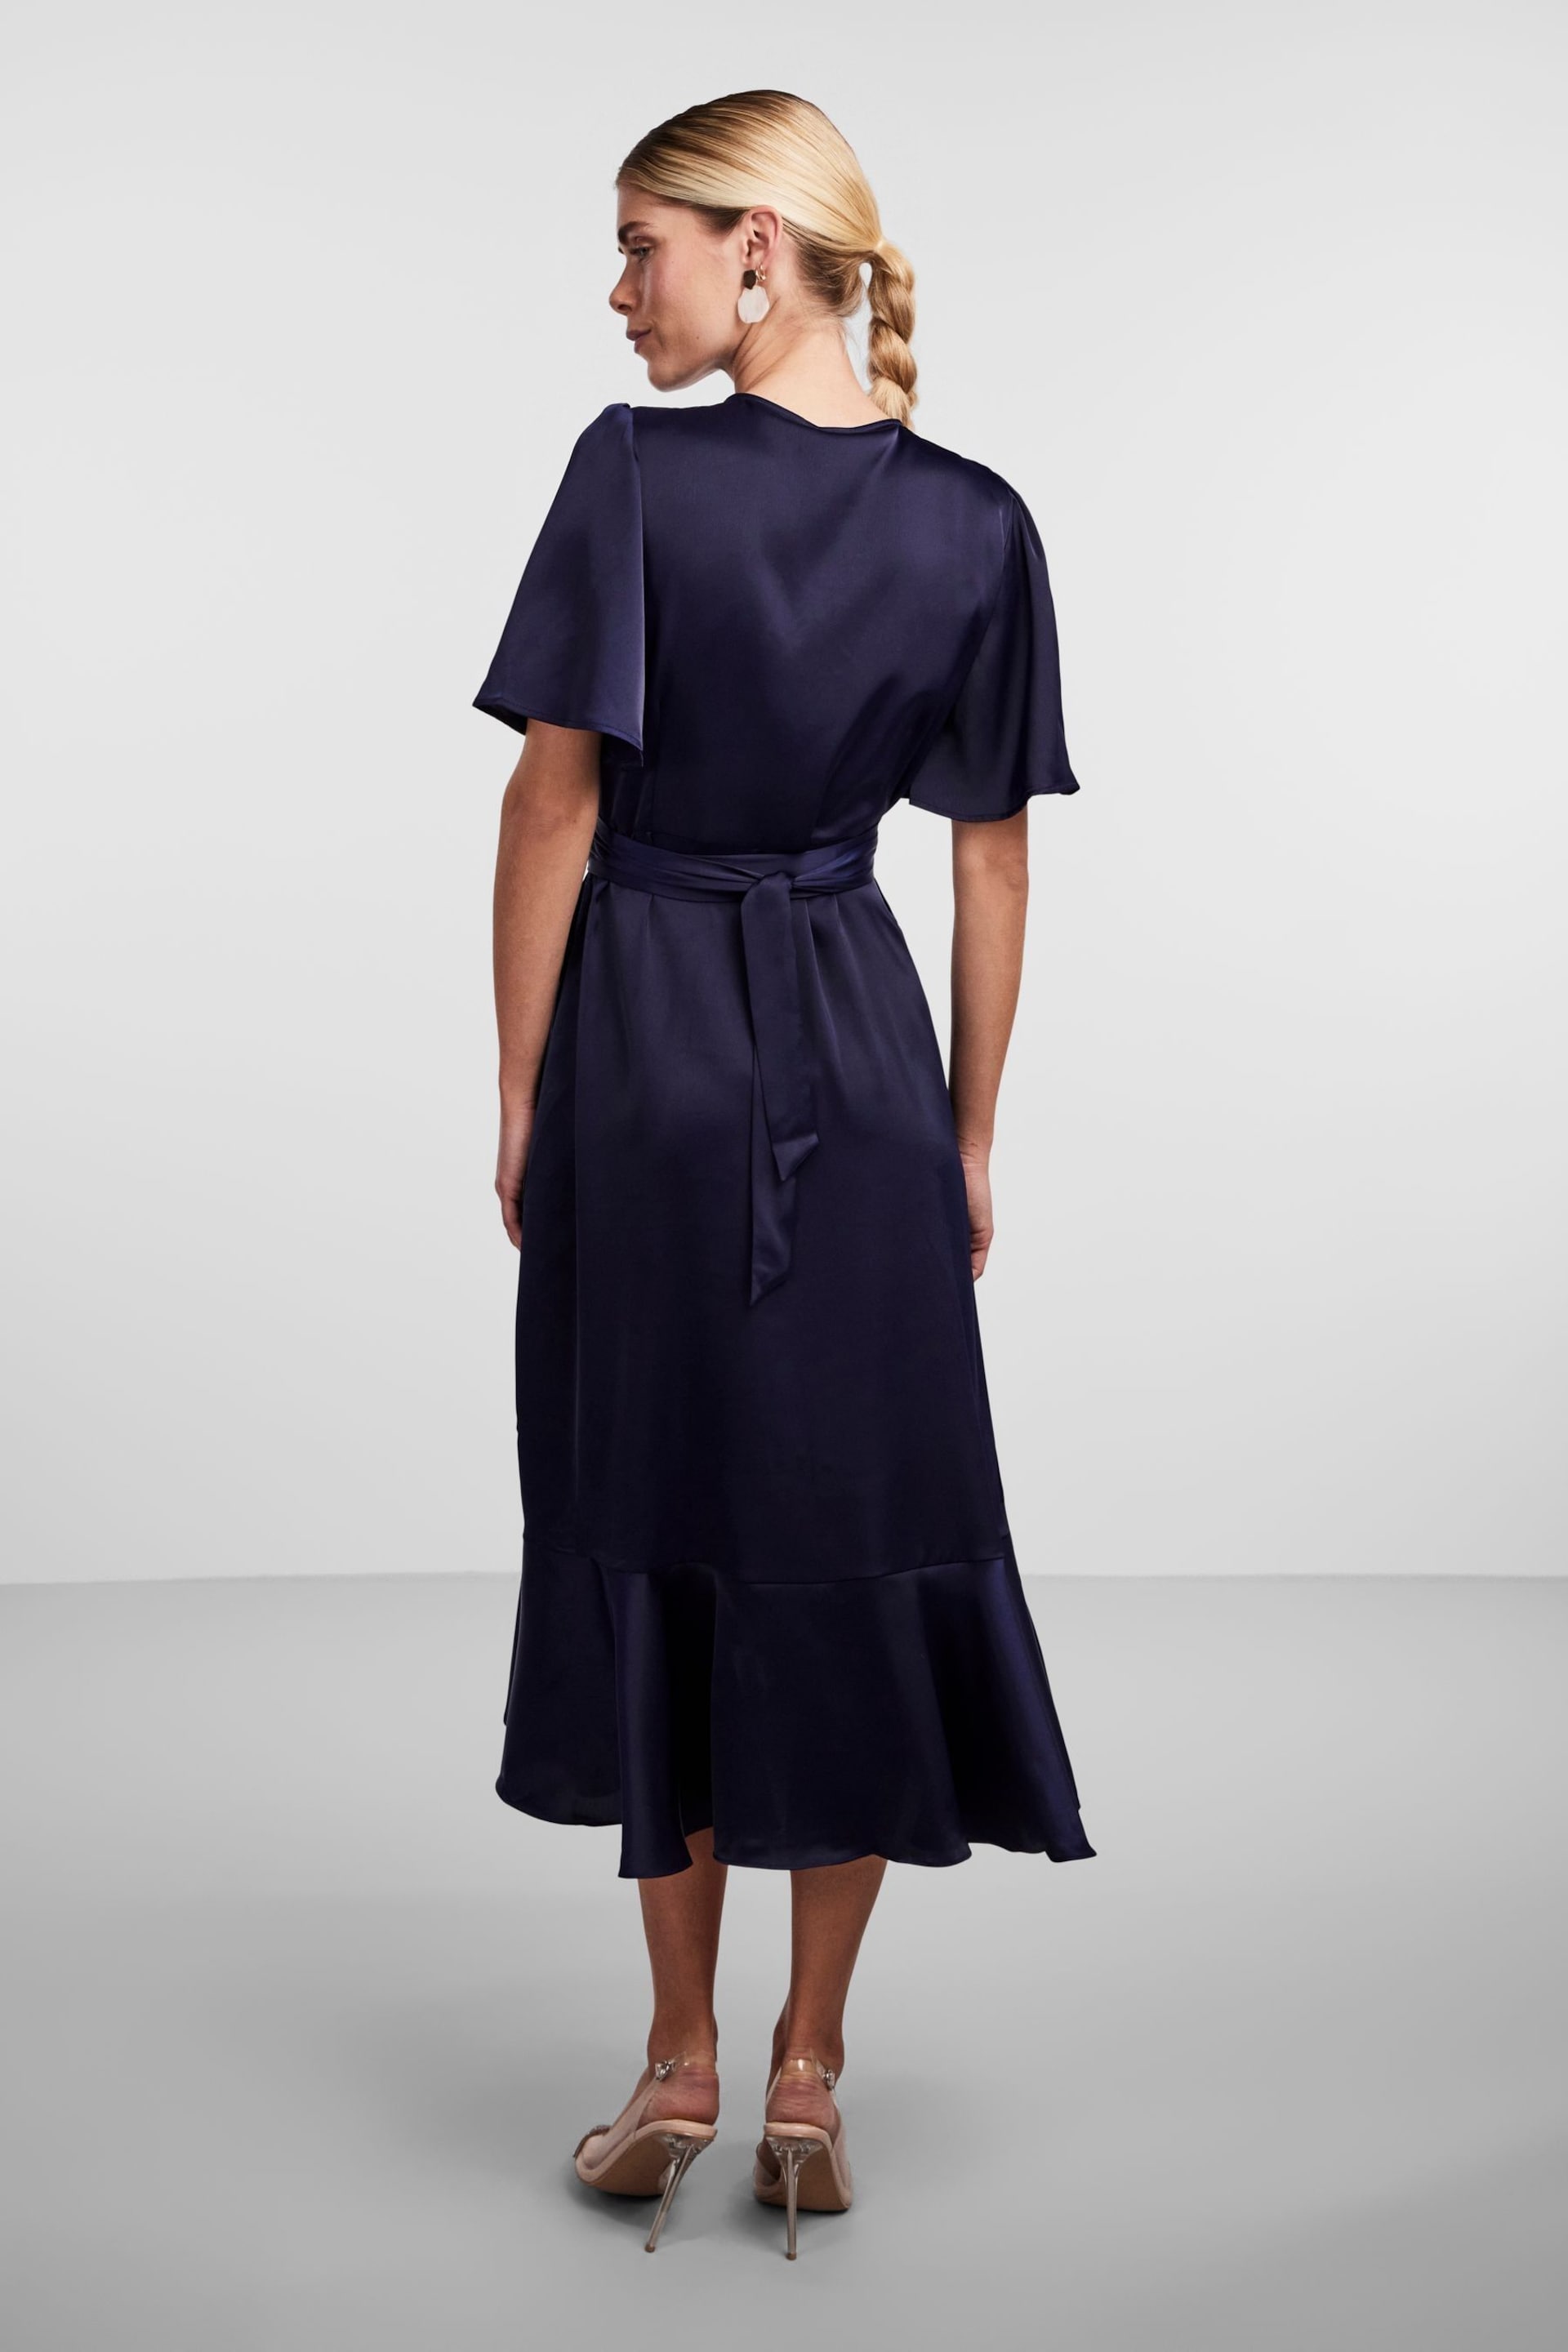 Y.A.S Navy Satin Short Sleeve Wrap & Ruffle Midi Occasion Dress - Image 3 of 5